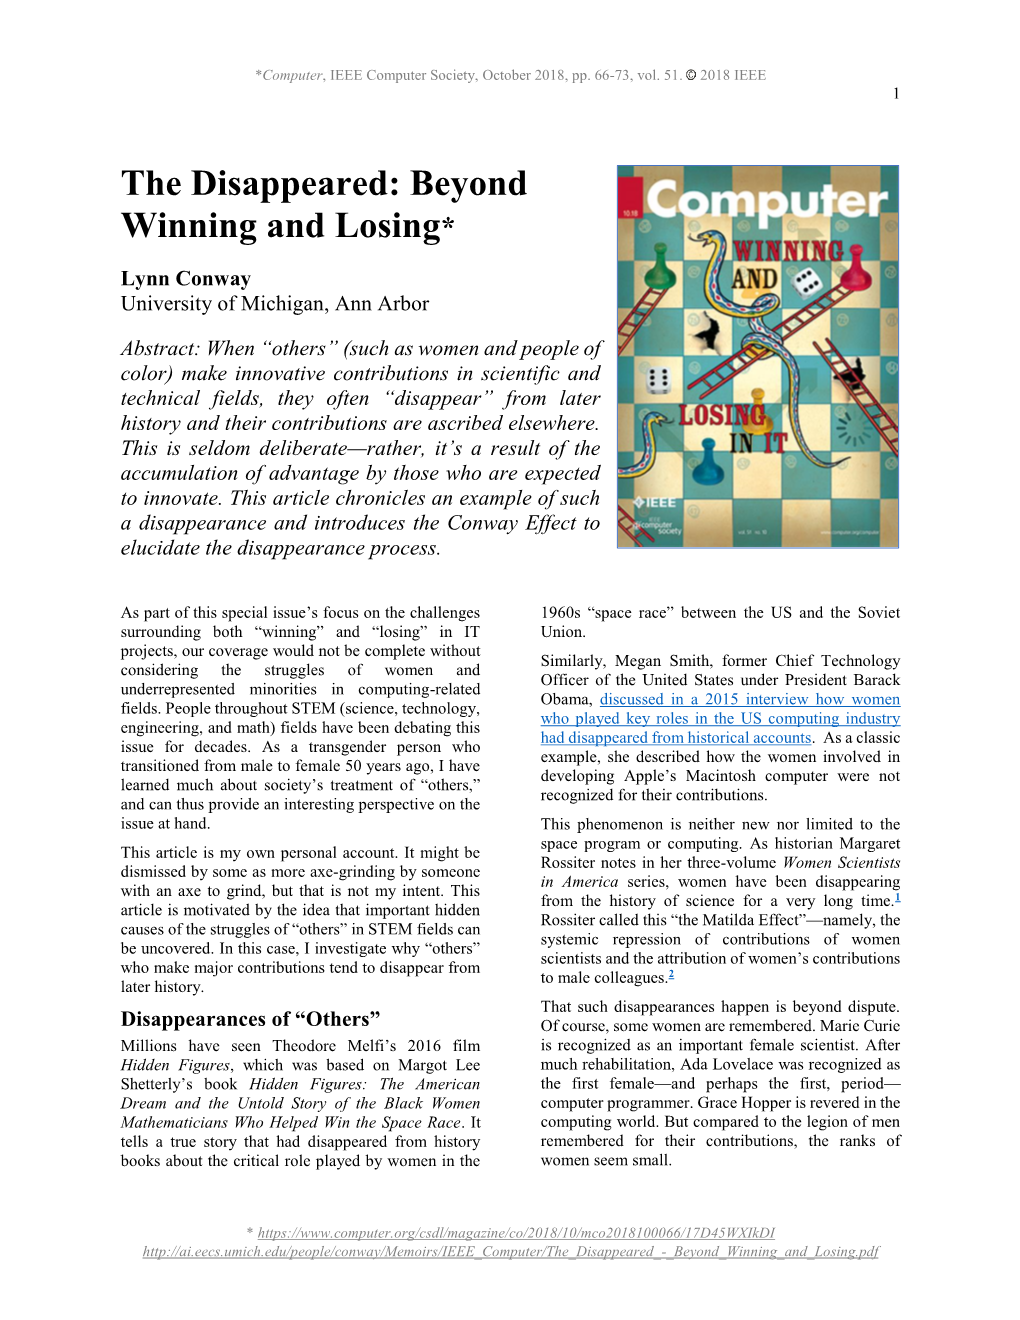 The Disappeared: Beyond Winning and Losing*